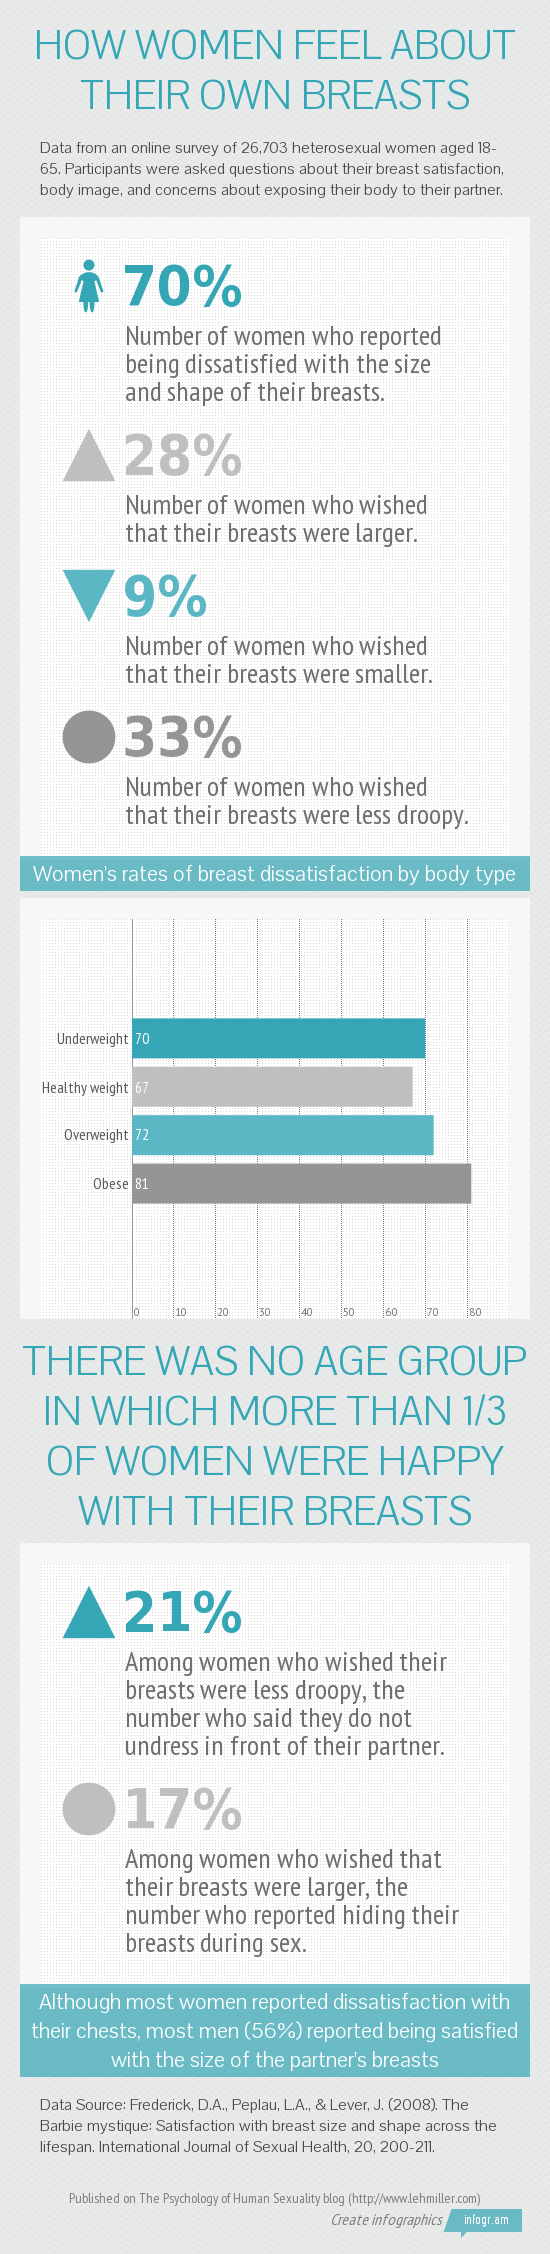 Infographic describing how women feel about the size and shape of their breasts